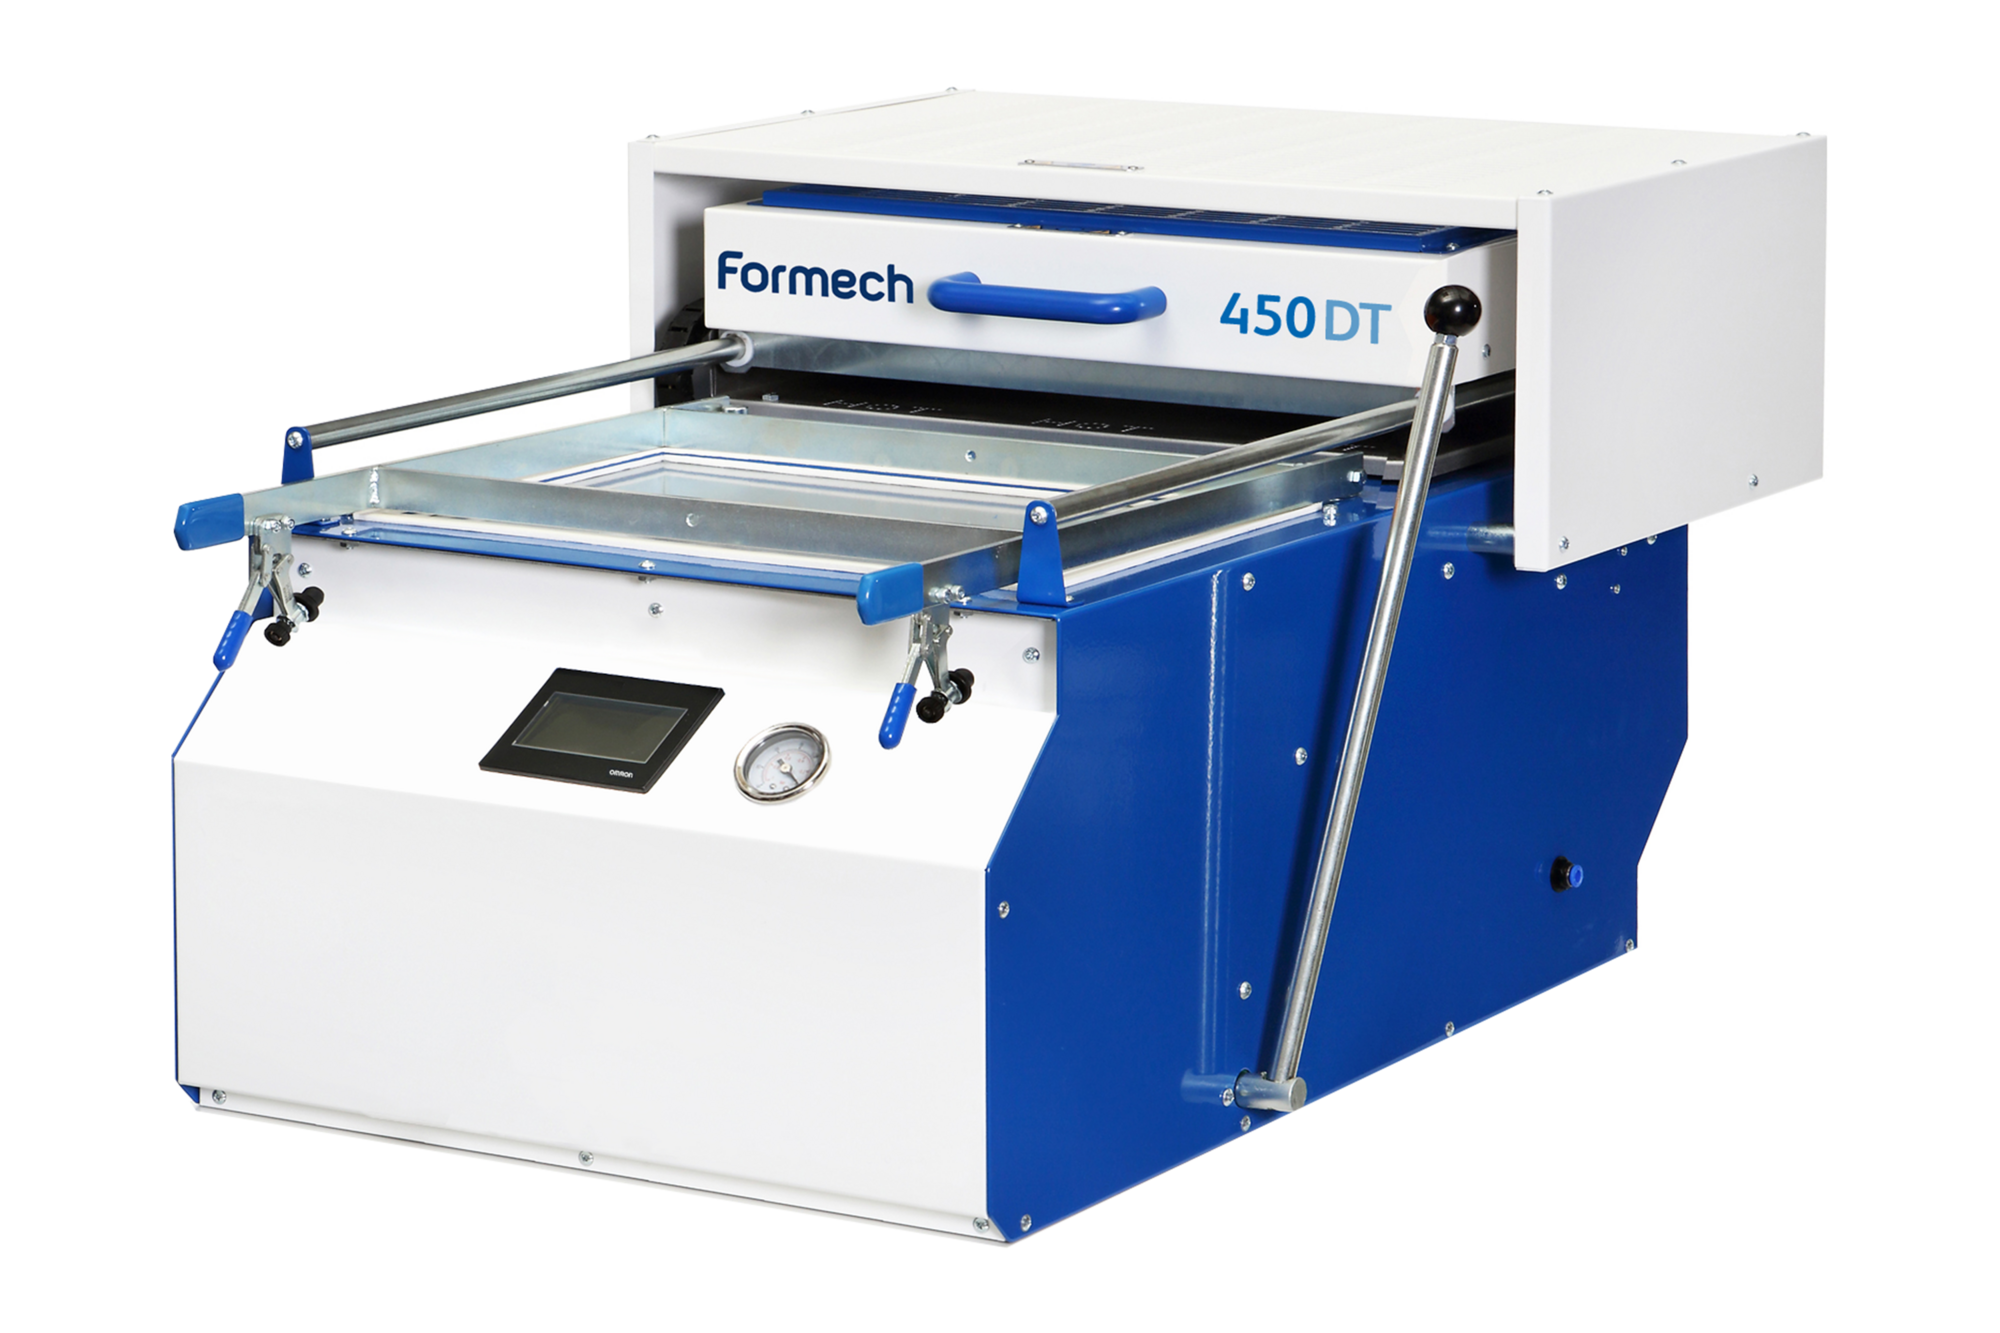 2022 FORMECH 450DT New Formech Thermoformers | CNC Router Store